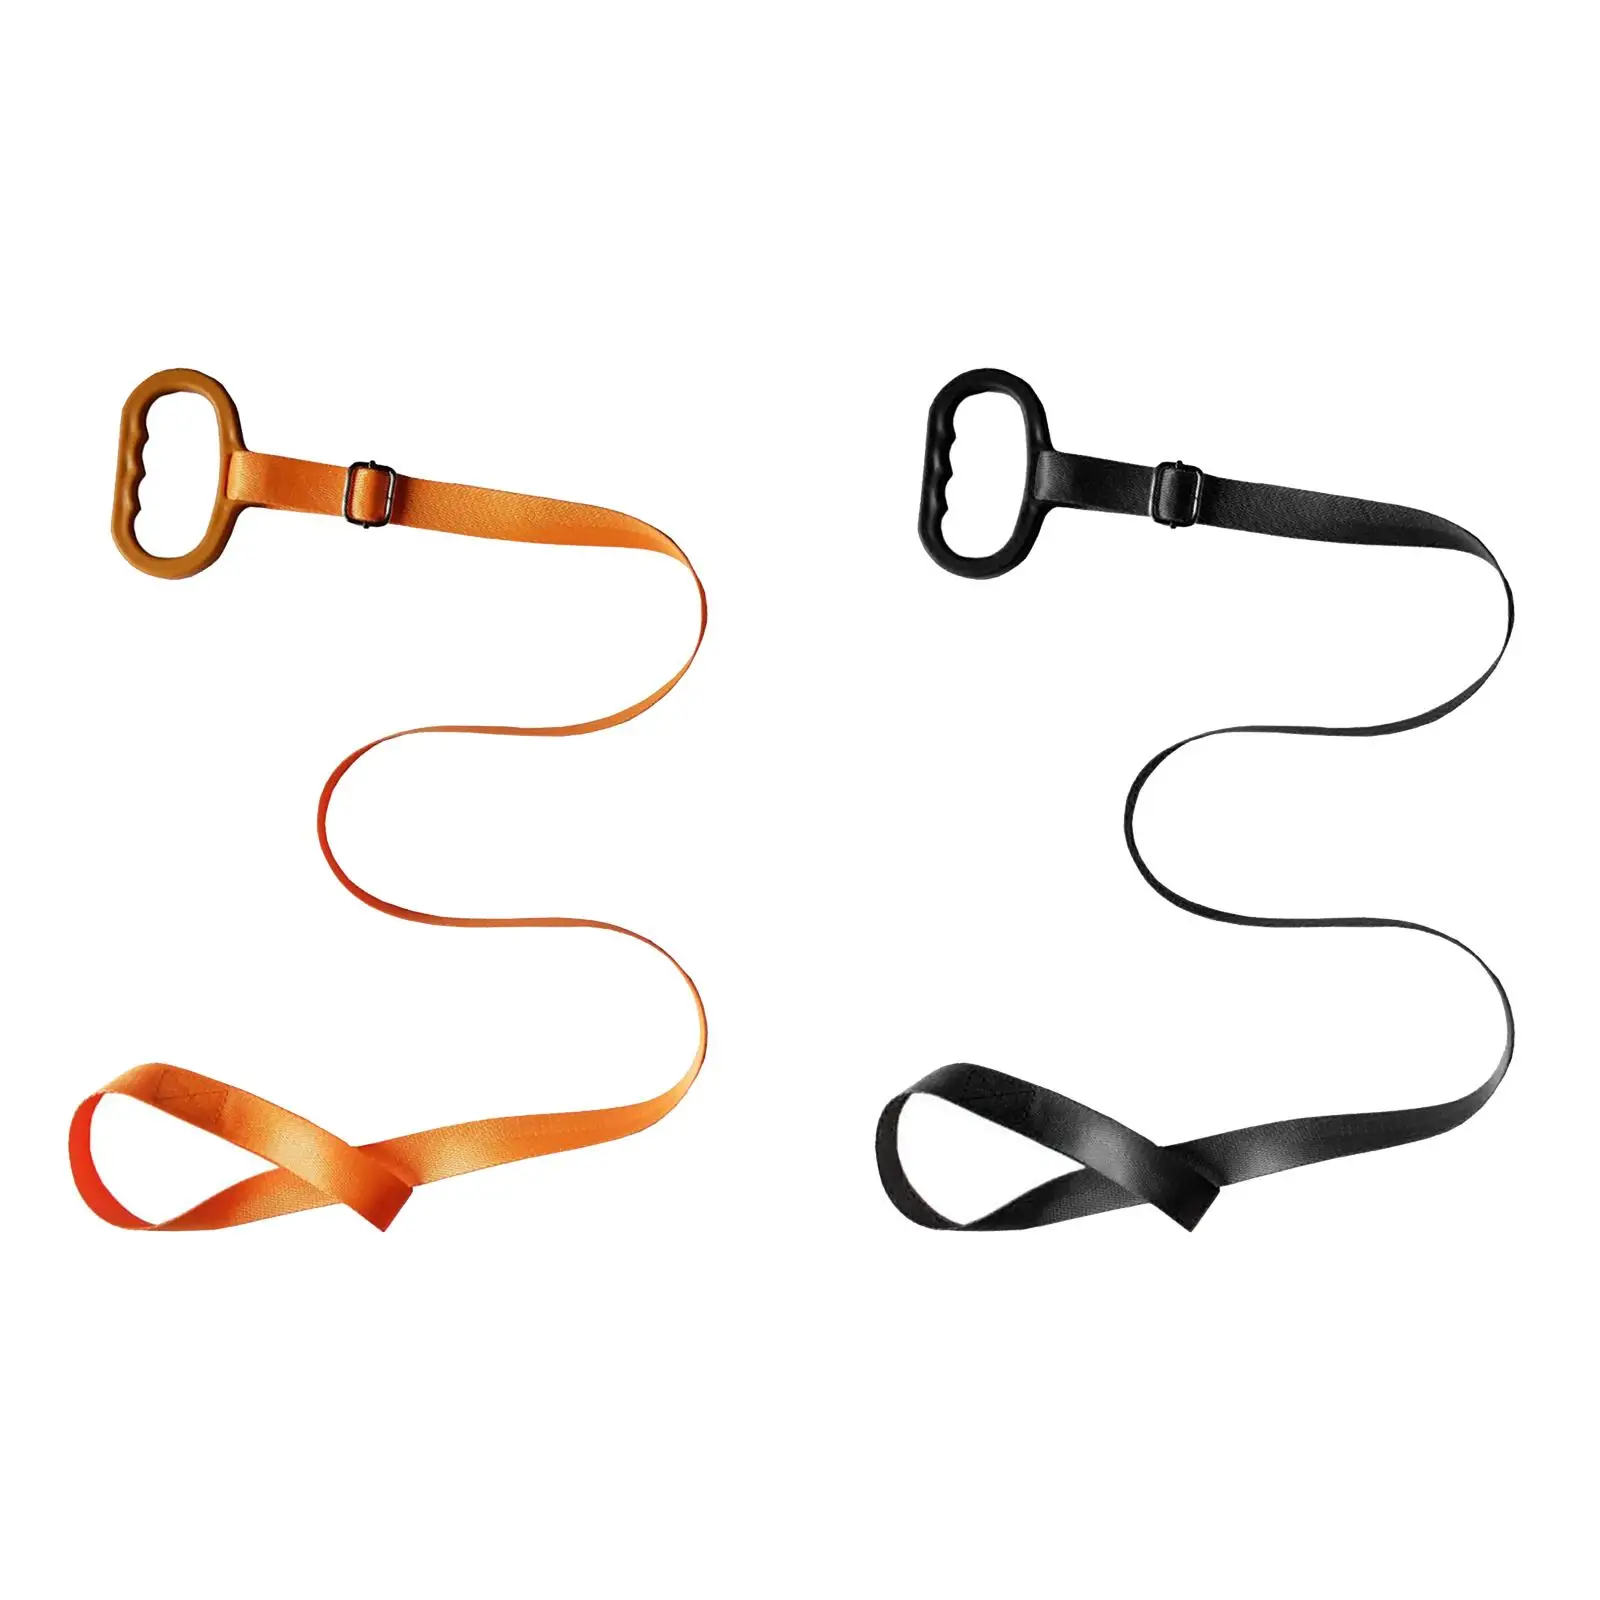 

Deer Drag Harness Durable Dragging Pull Rope Band with Handle Multipurpose Portable Puller Outdoor Equipment Hunting Gear